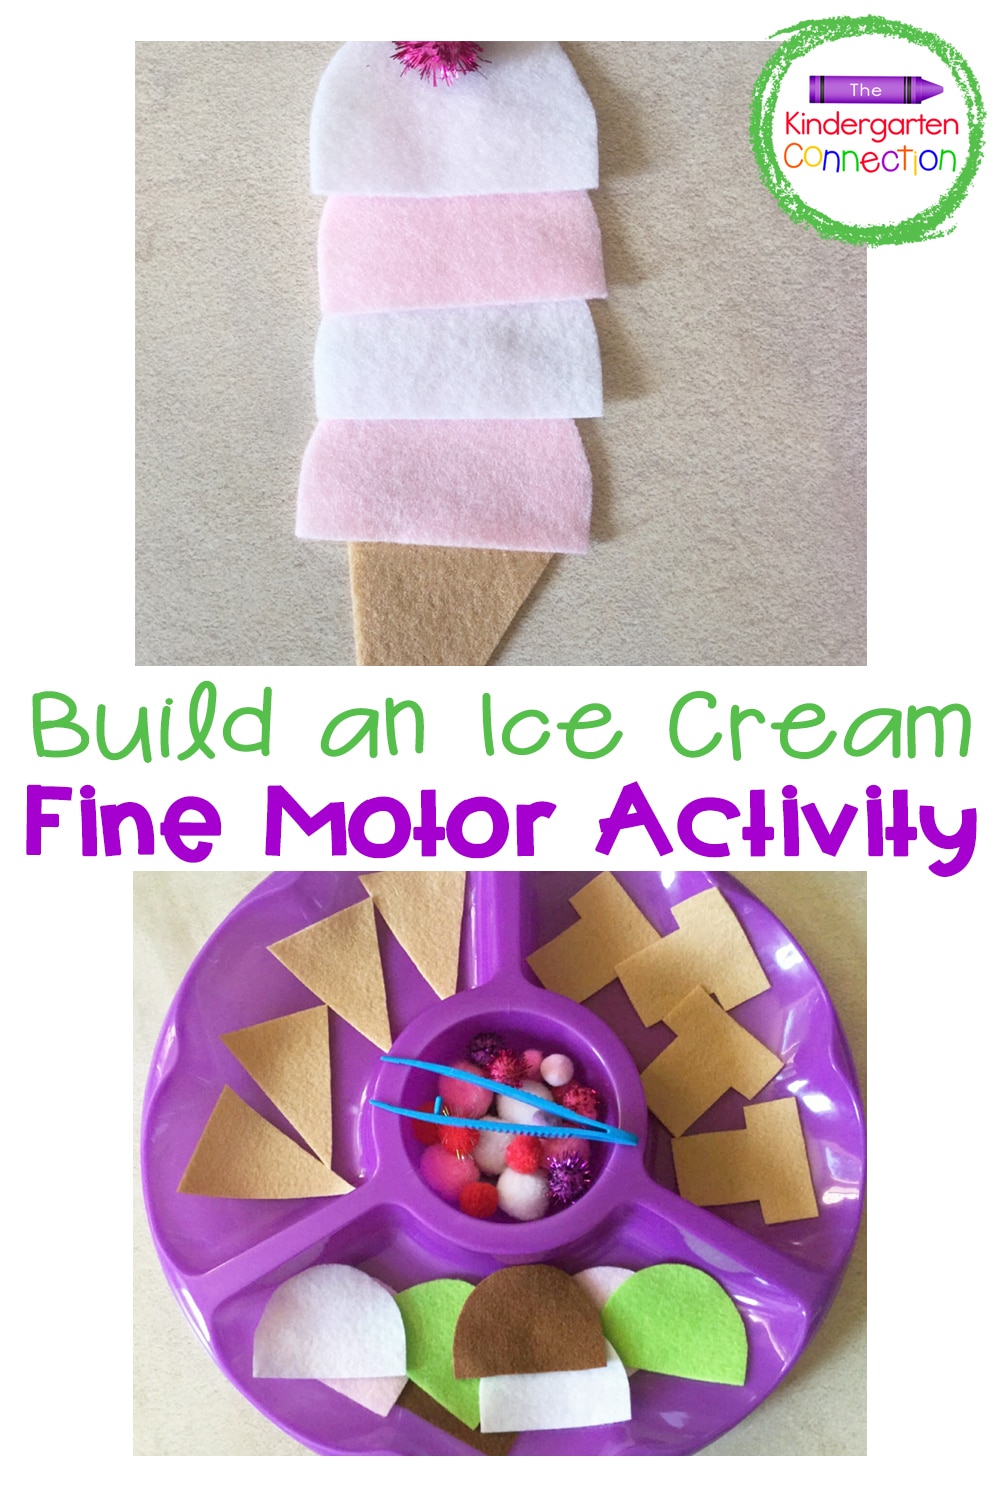 This Build an Ice Cream Cone activity is a great way to work on fine motor skills, patterning, and counting in a fun, hands-on way!